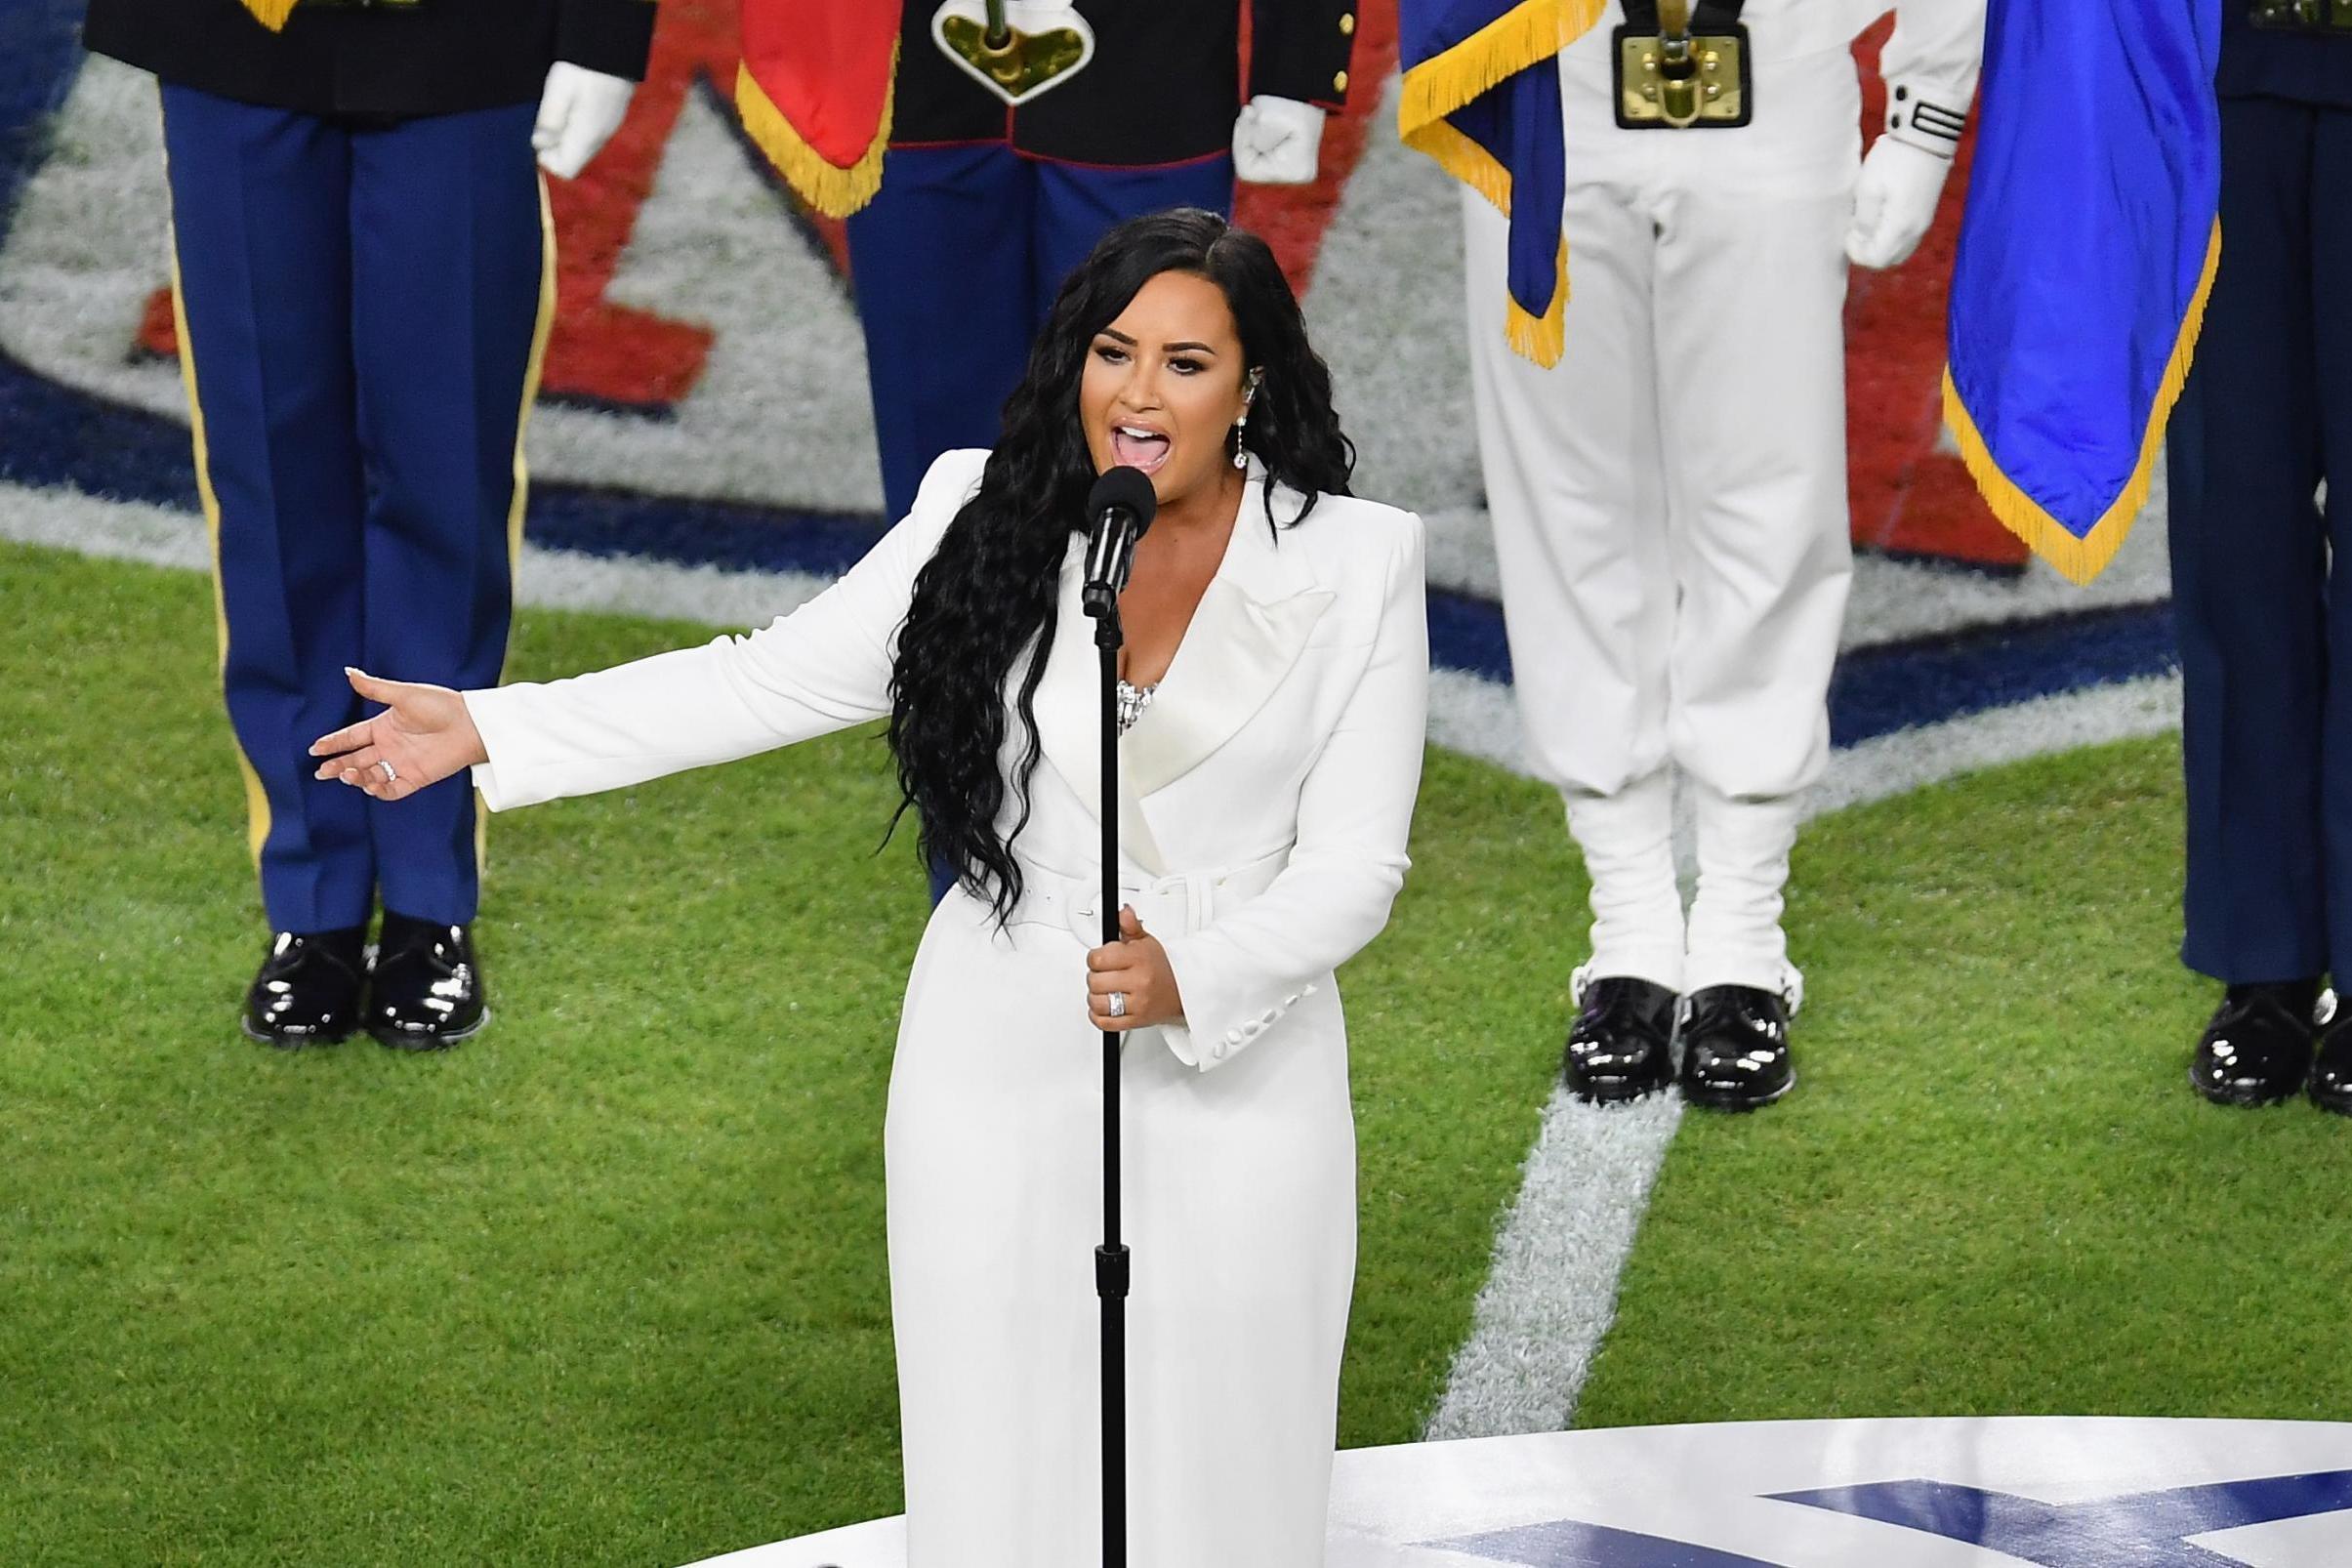 Demi Lovato says she 'blacked out' during Super Bowl performance: 'I was so excited'